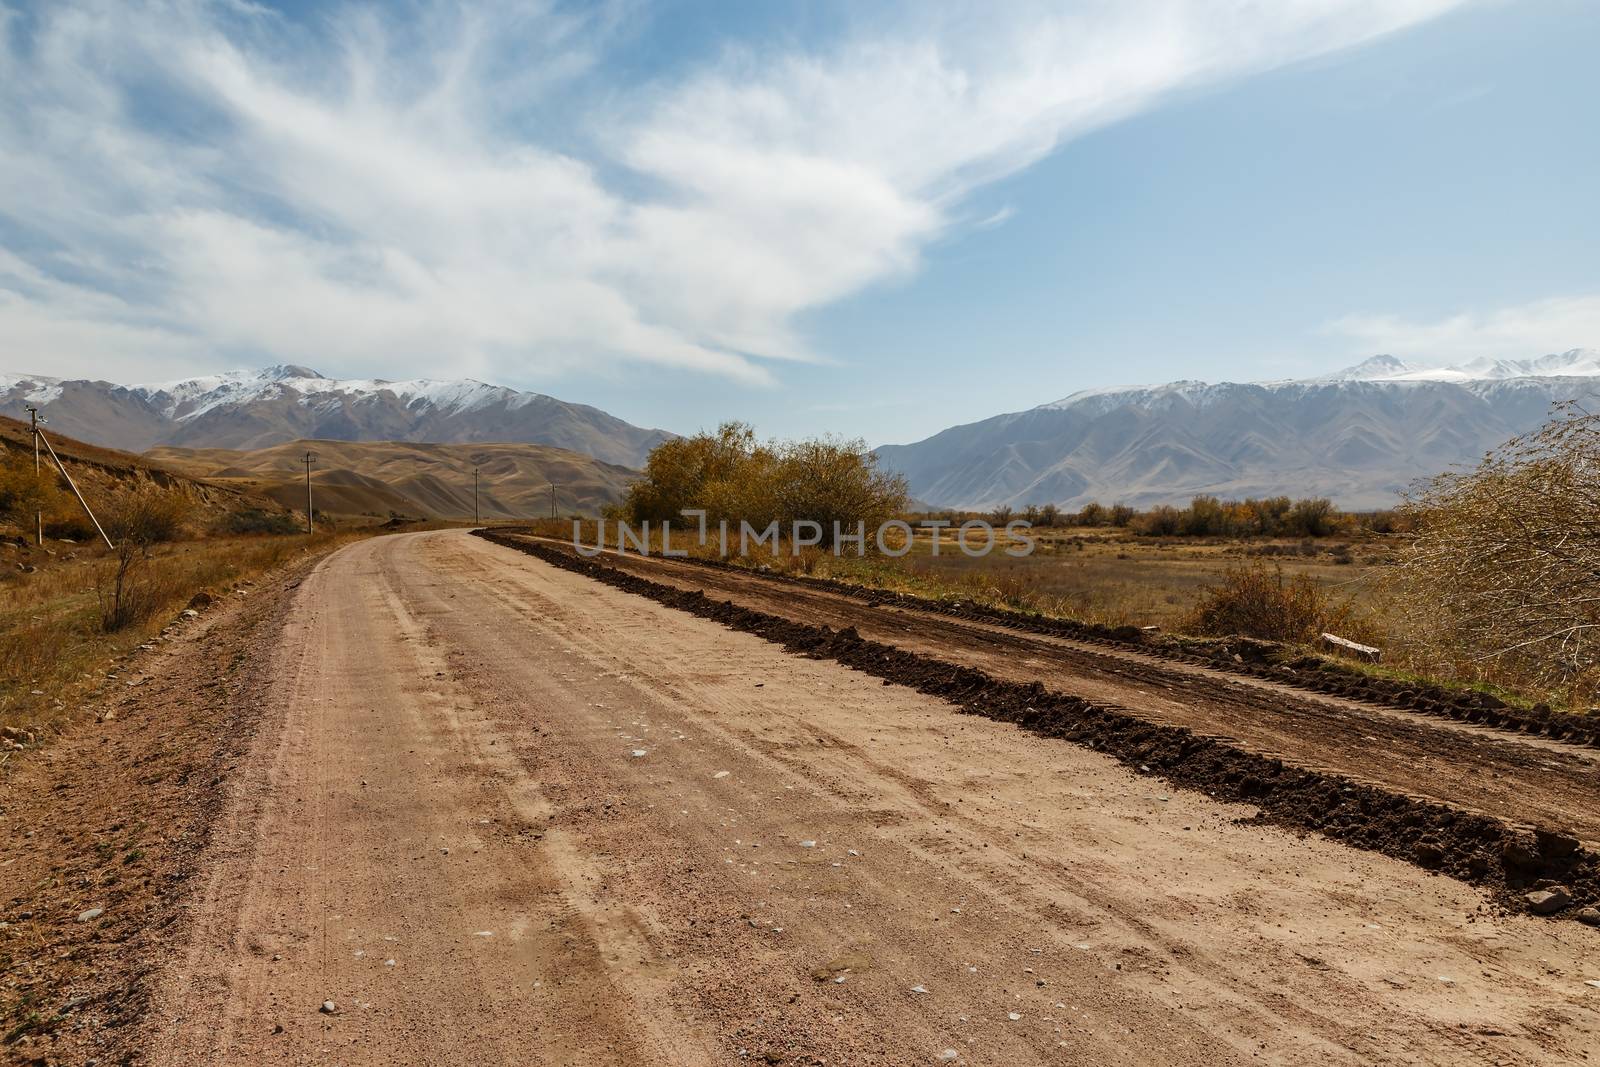 A367 highway passing in the Chui region of Kyrgyzstan near the village of Kojomkul.